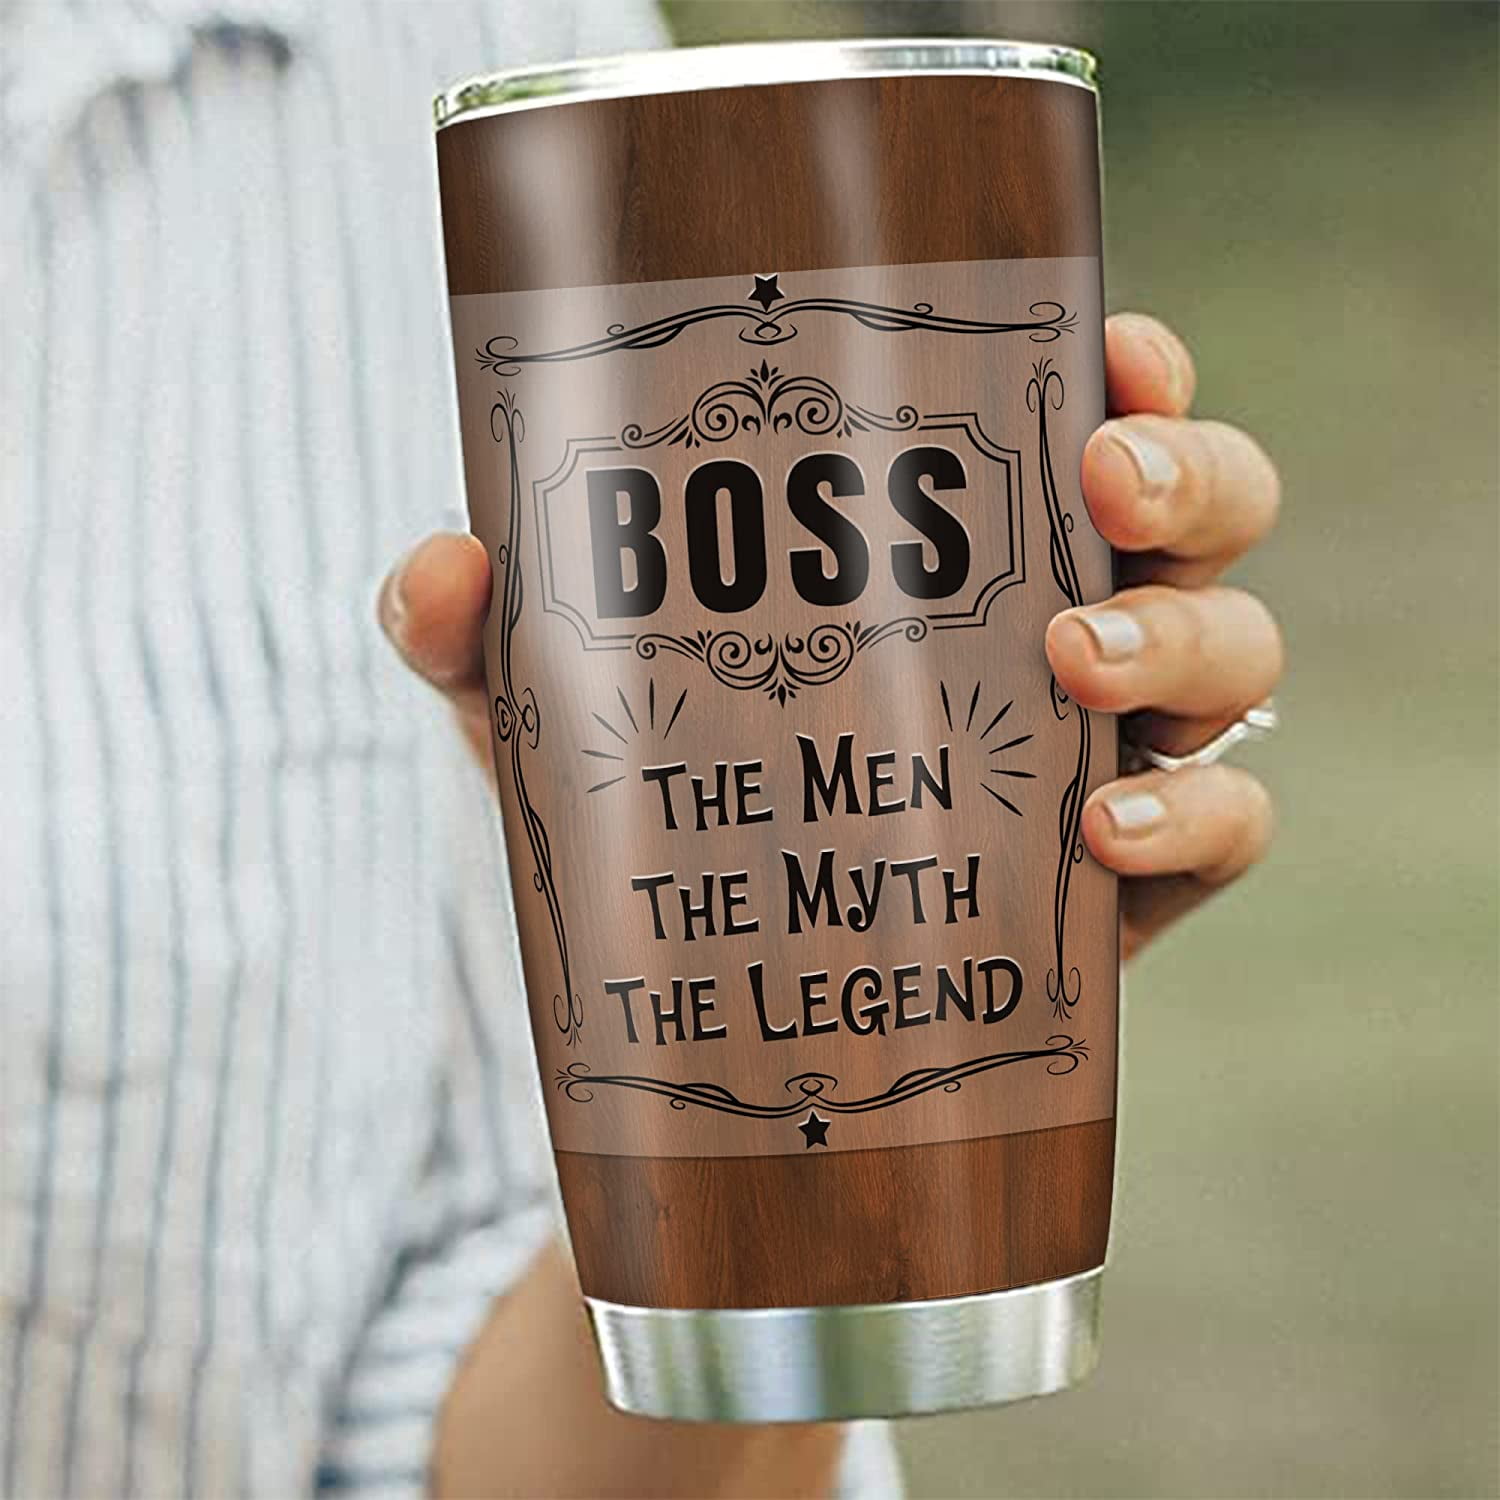 Soho Boss Gift Beer Mug for Men, 24oz Stainless Steel Insulated Tumbler Cup with Handle for Boss Day/Christmas/Appreciation/Office Coolest Boss Ever (